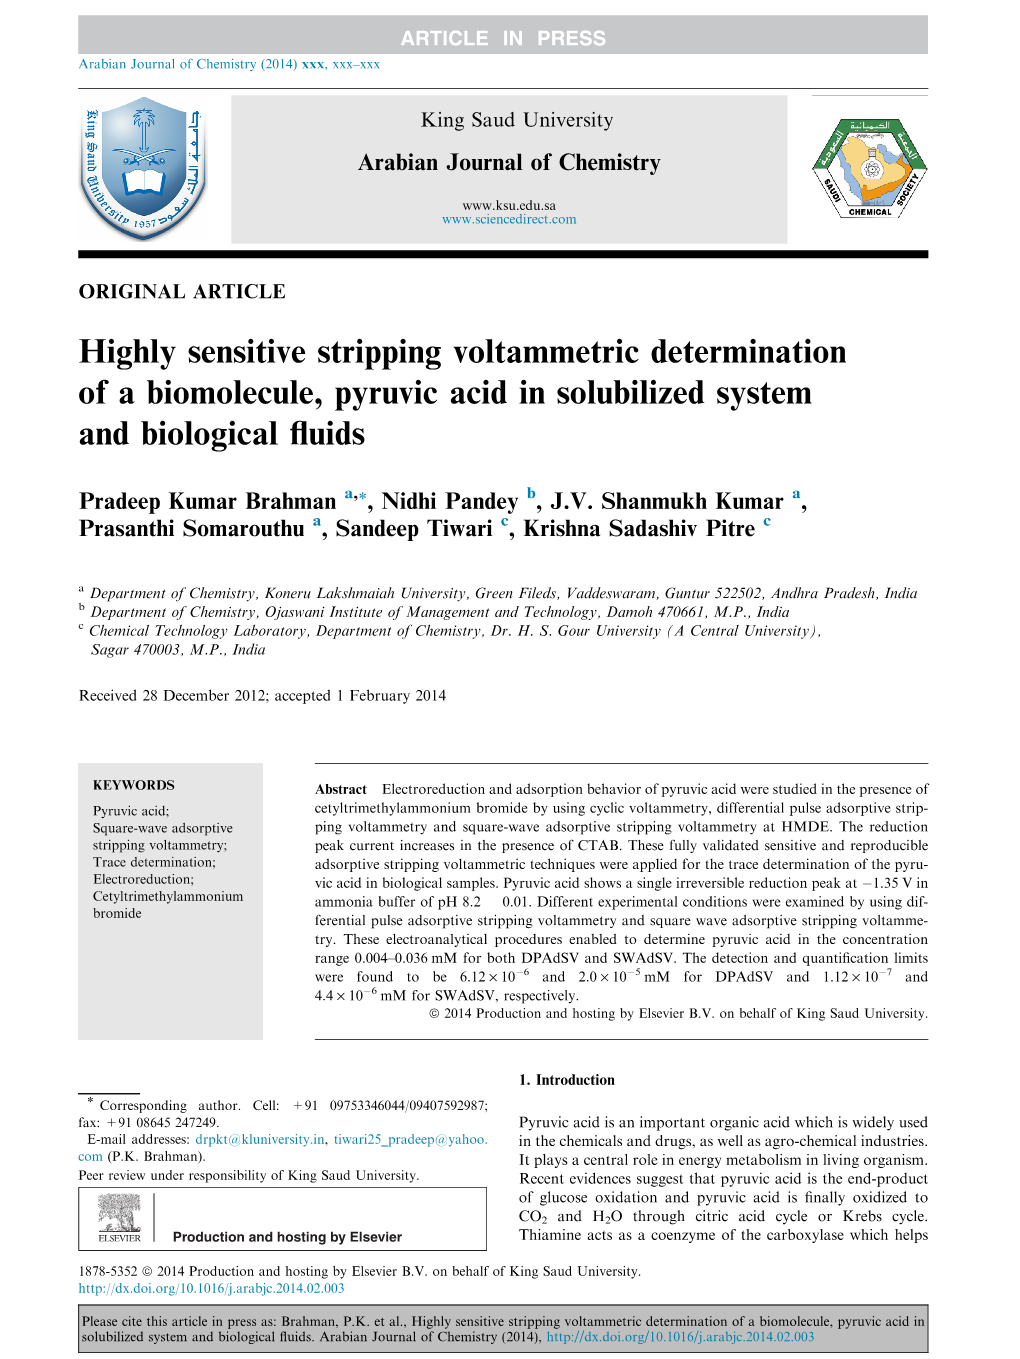 Highly Sensitive Stripping Voltammetric Determination of a Biomolecule, Pyruvic Acid in Solubilized System and Biological ﬂuids